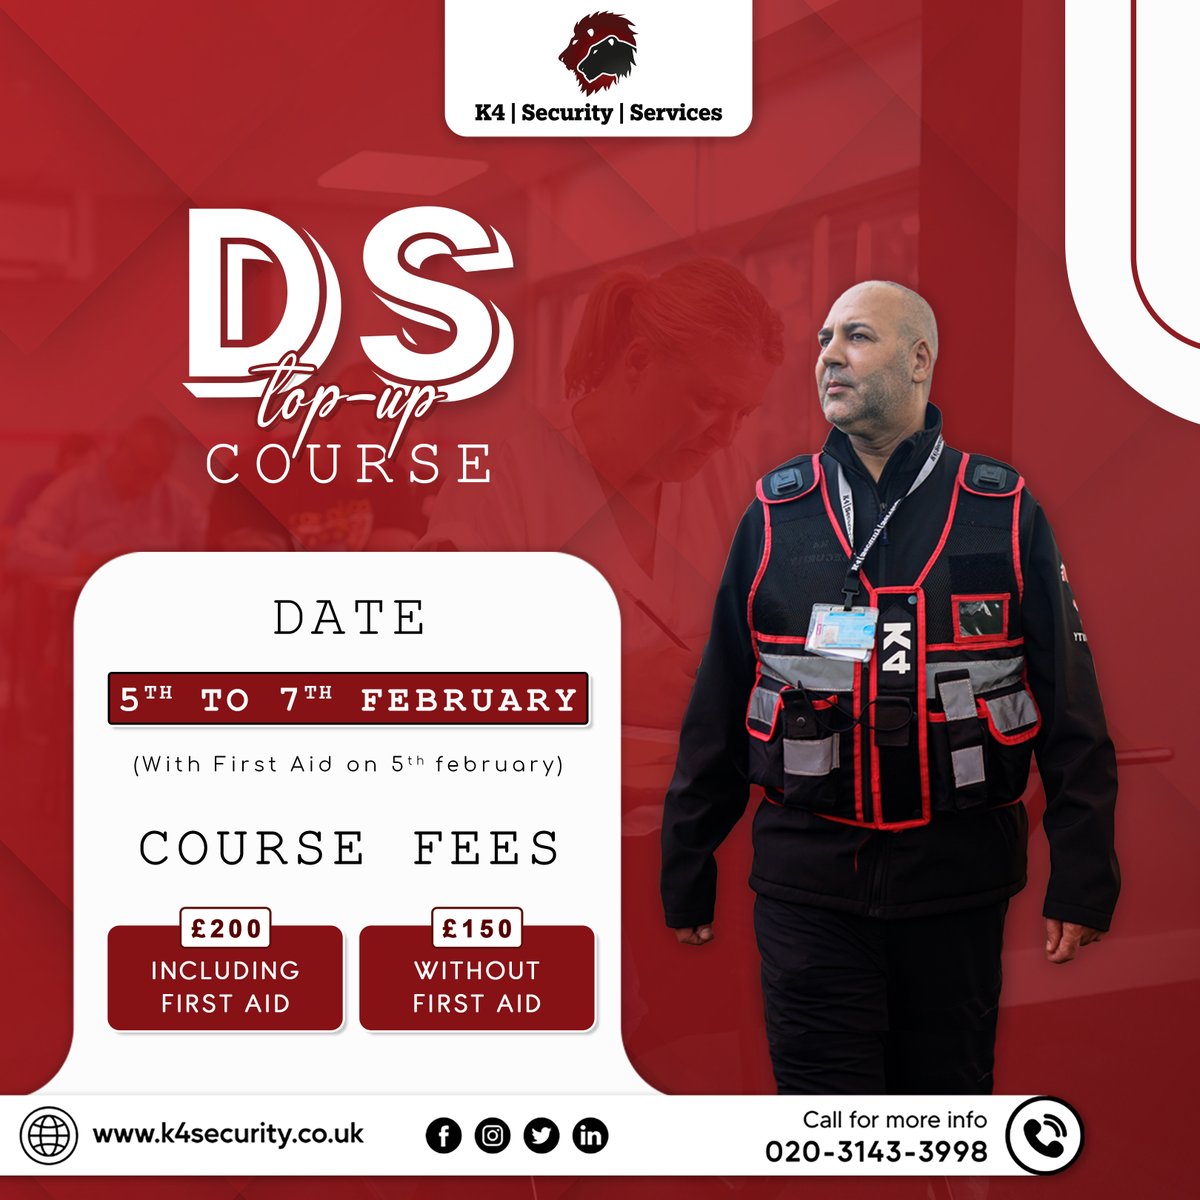 Elevate Your Security Skills with Our 3-Day Door Supervisor Top-up Course!

Click now to secure peace of mind: k4security.co.uk

#SecurityTraining #DoorSupervisorTop-up #SkillsElevation #FirstAidTraining #ProfessionalDevelopment #LimitedSpaces #K4Security #UK